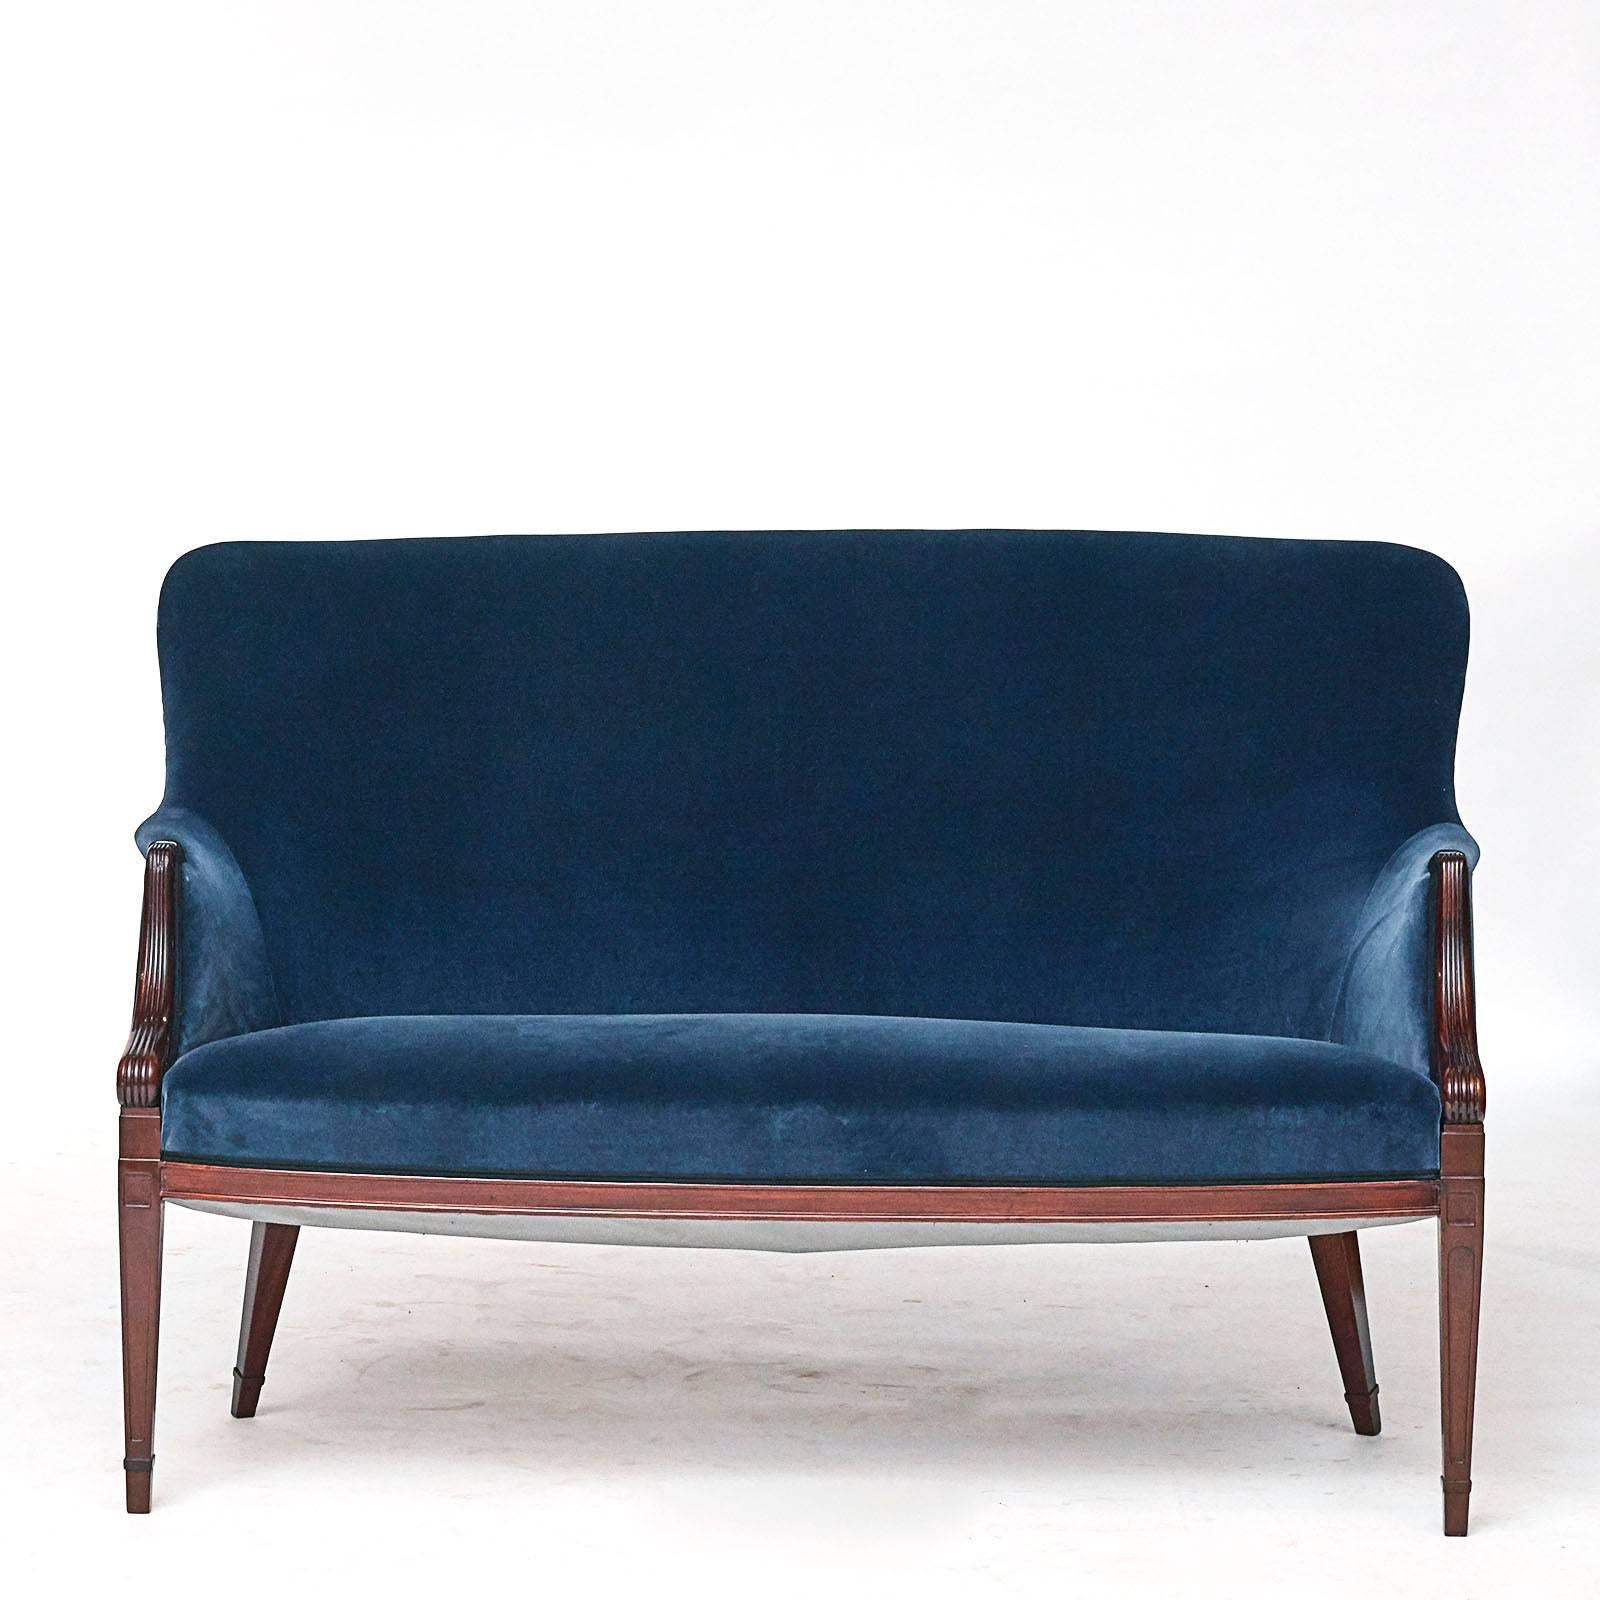 A Danish sofa by Frits Henningsen, circa 1940s, with an upholstered back and seat, channelled scrolled armrests raised on square tapered legs. 
New rich dark blue velvet upholstery.